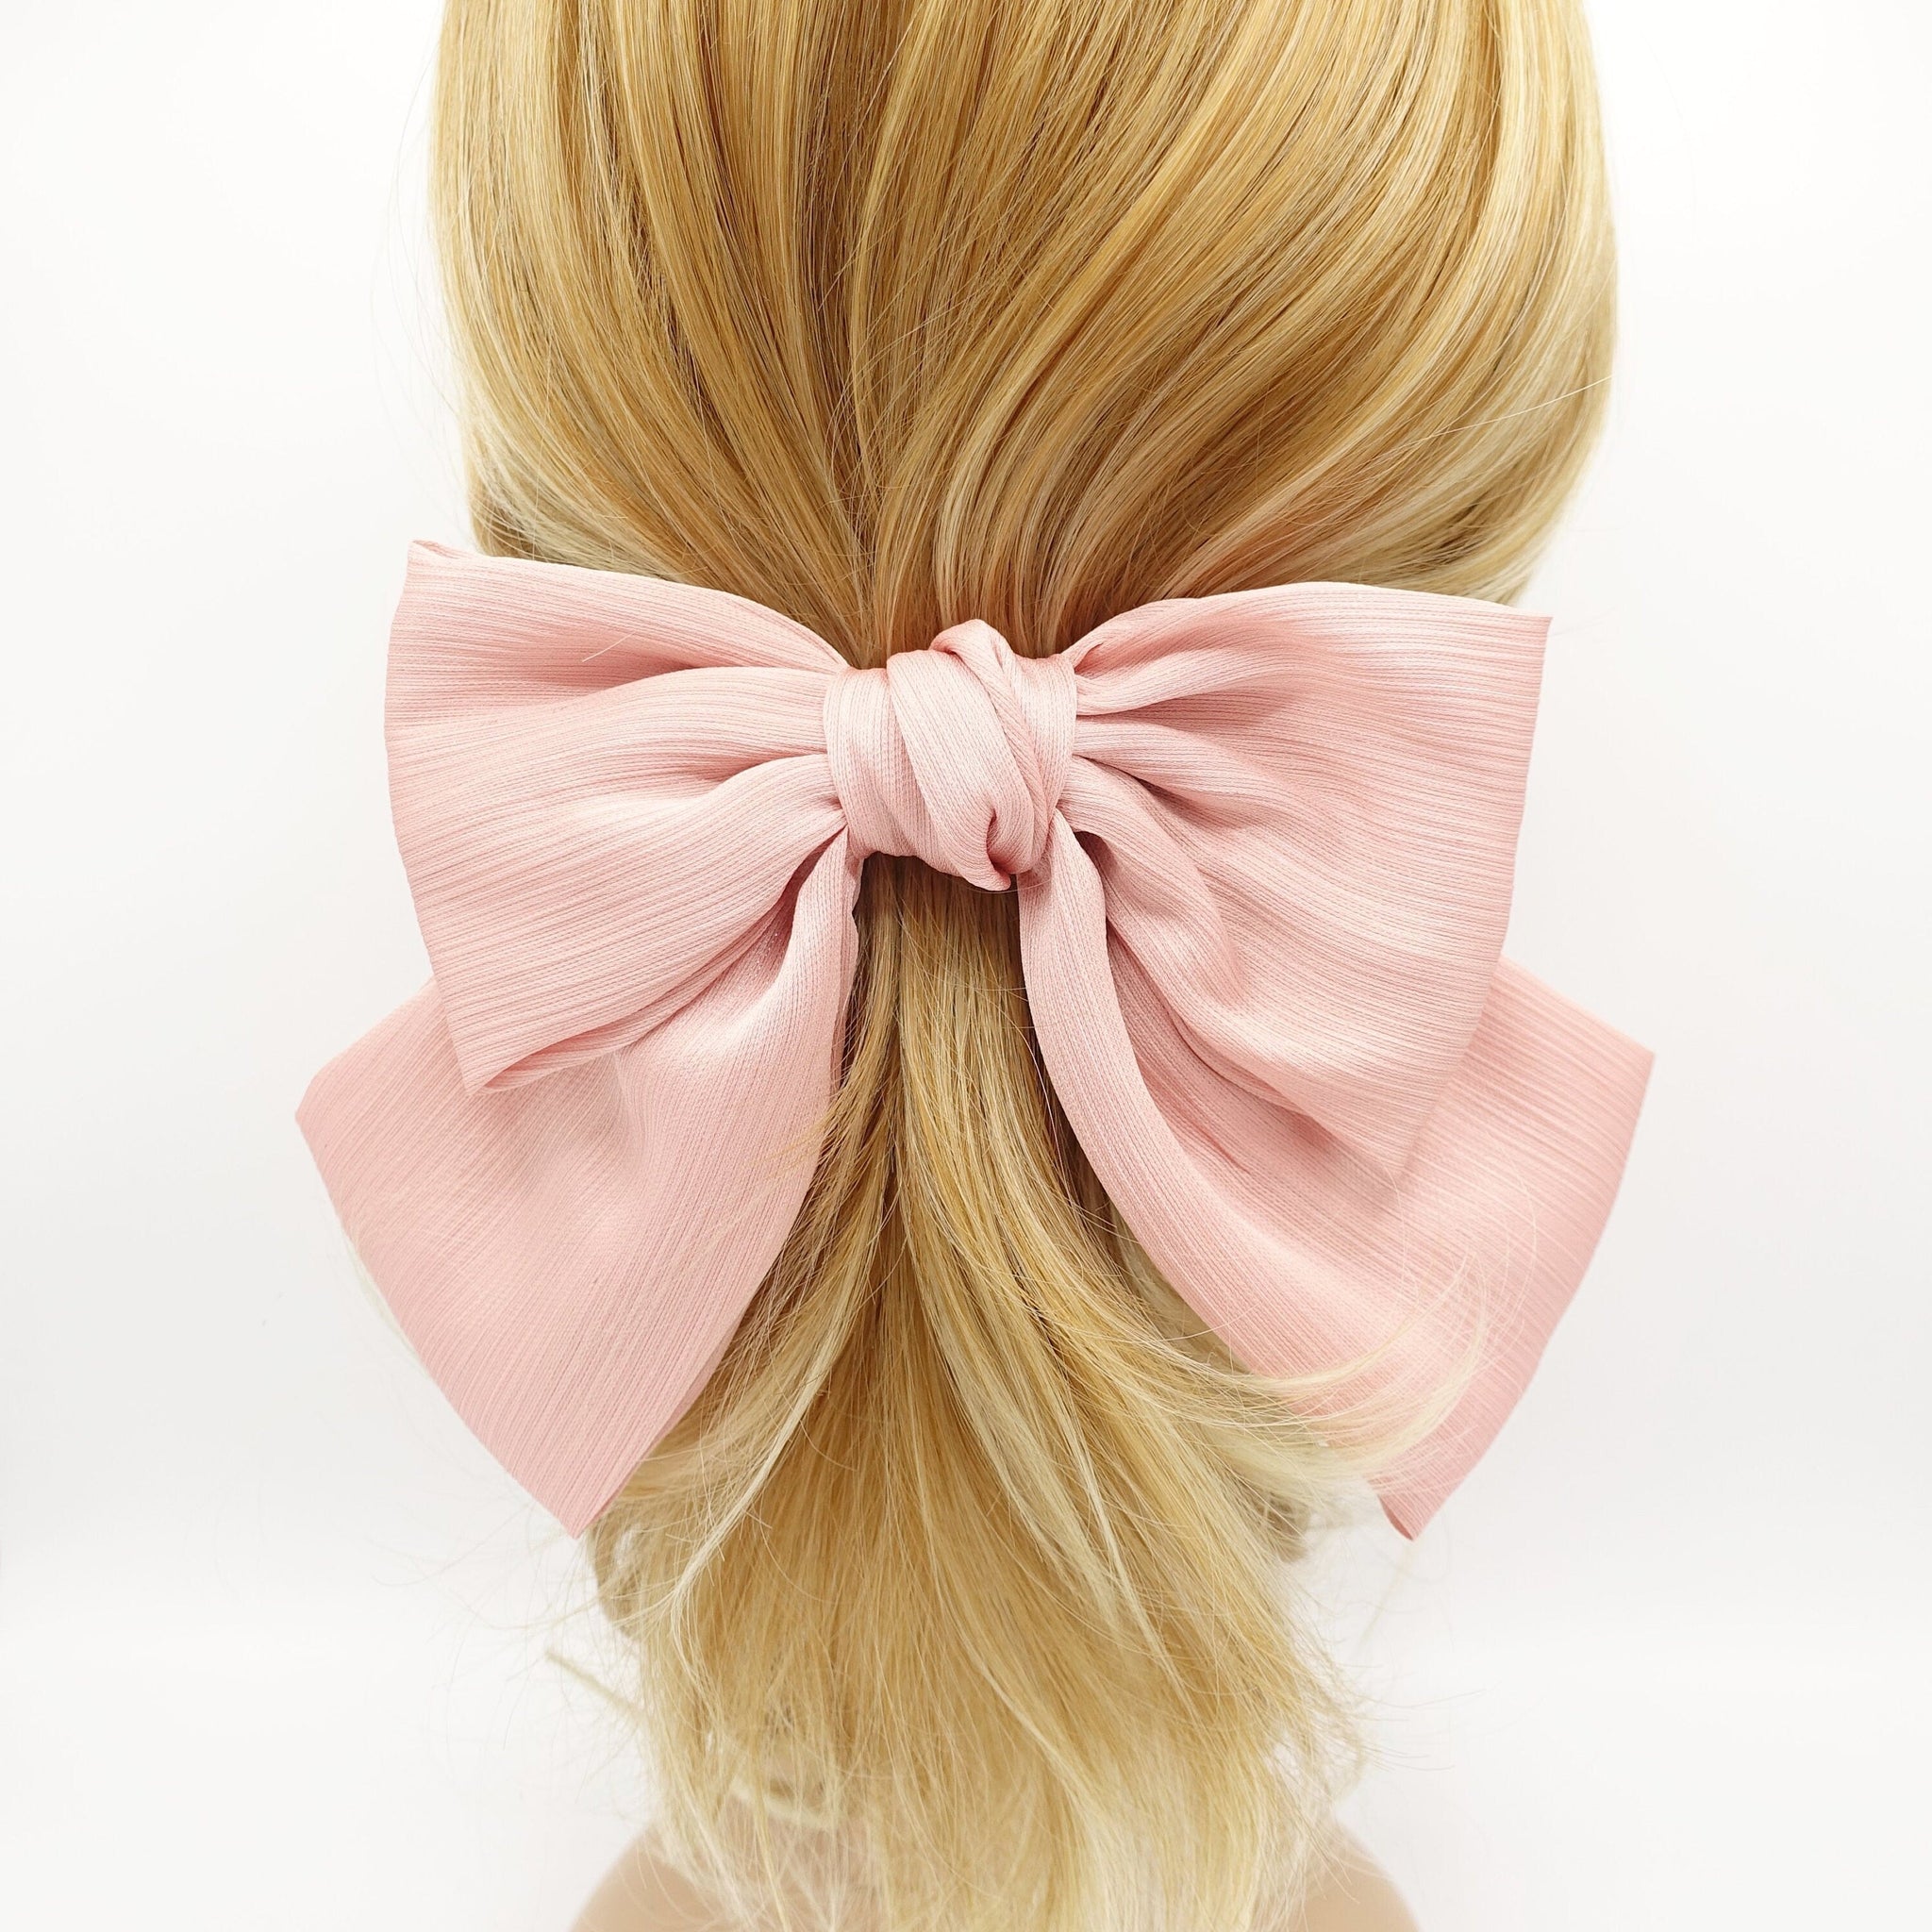 veryshine.com Barrette (Bow) Peach pink pearl glossy crinkled satin bow french hair barrette women hair accessory